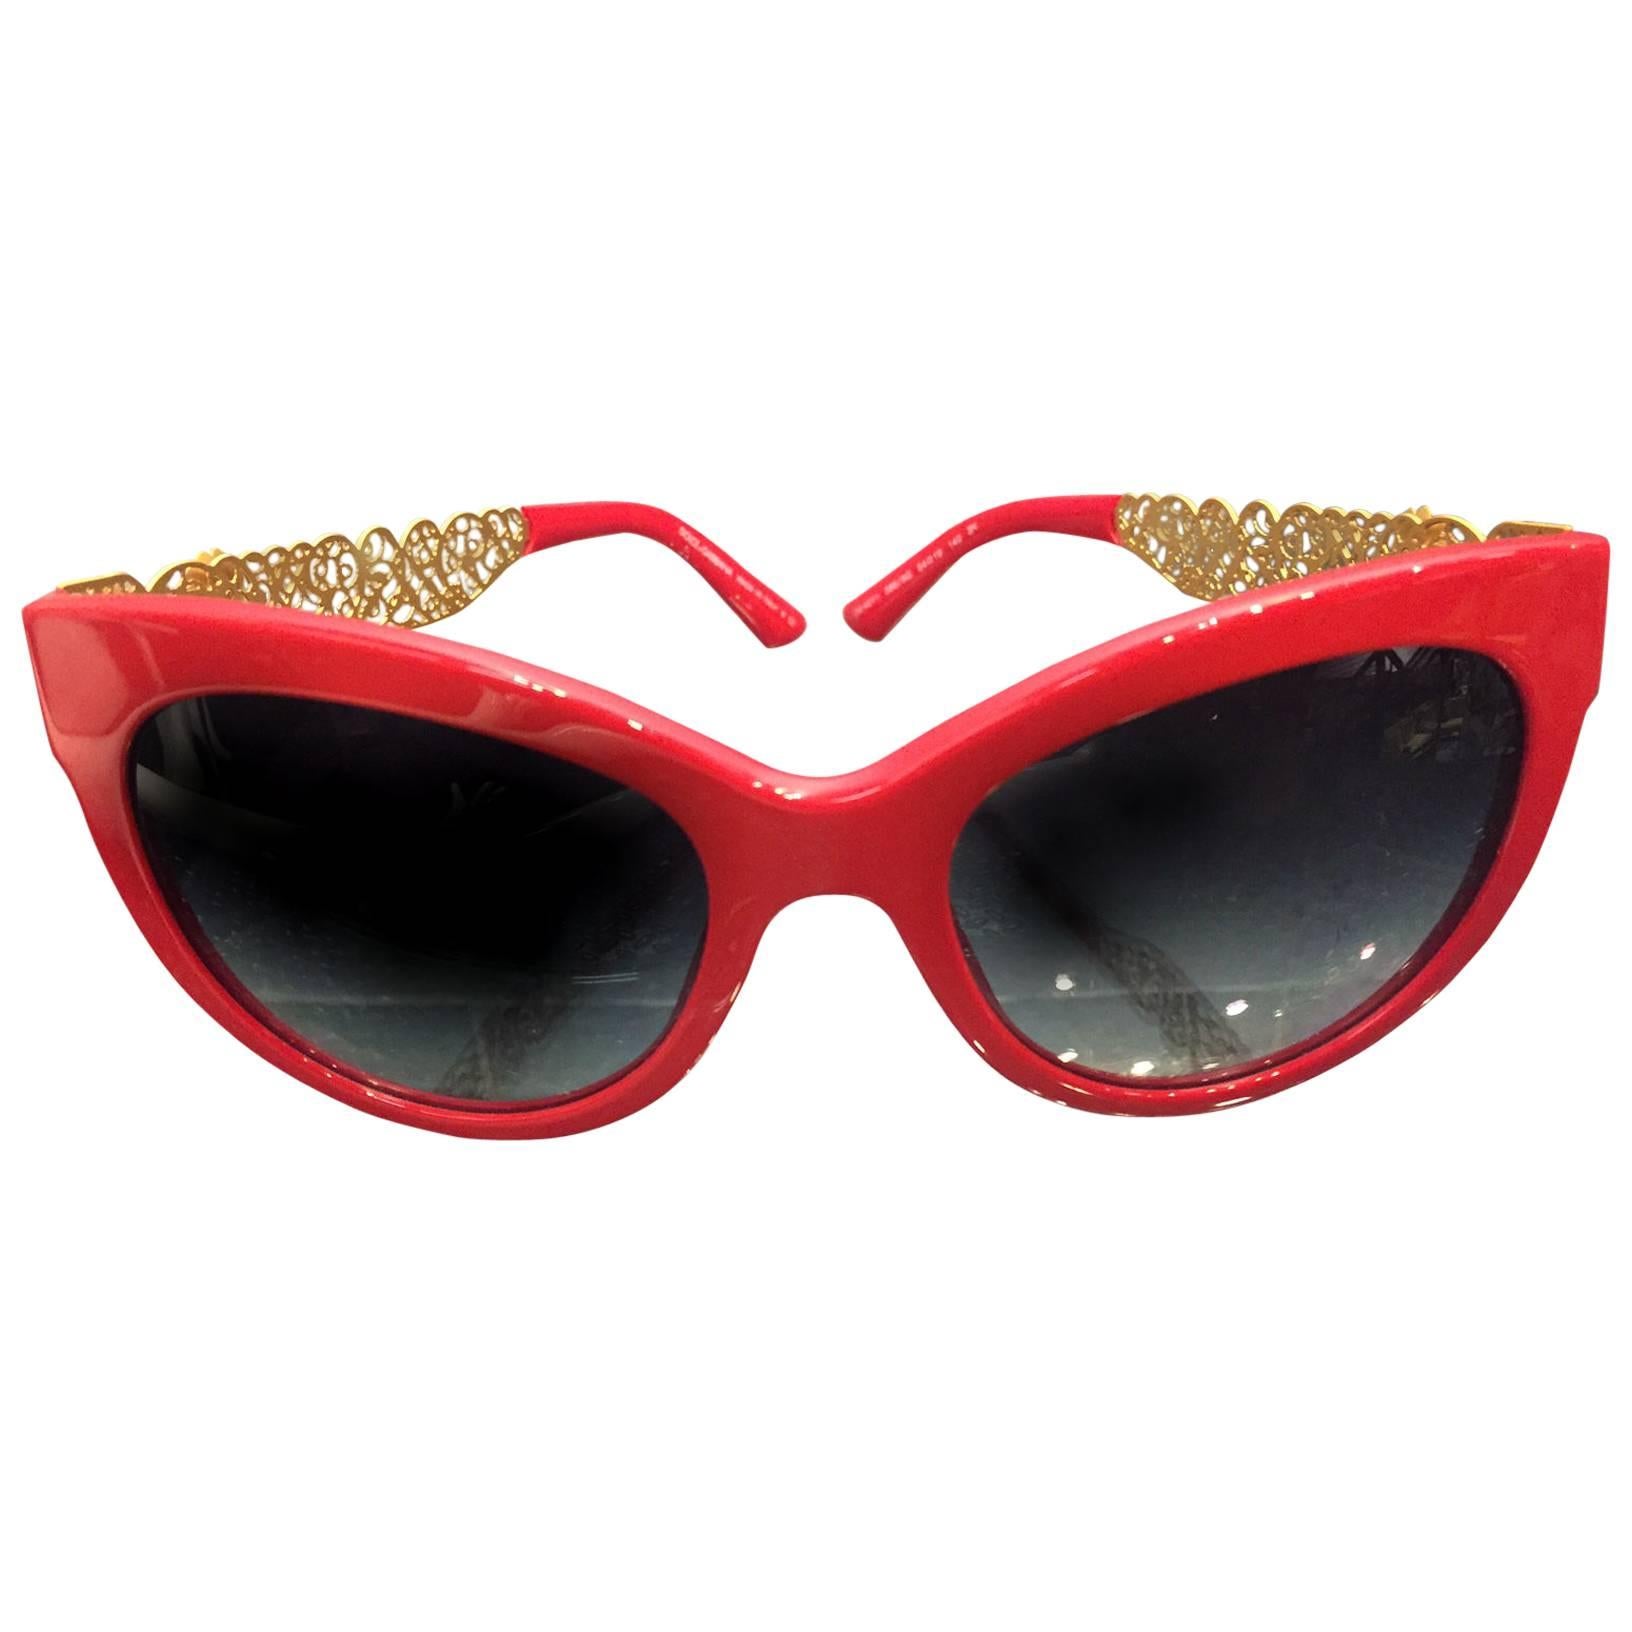 1980s Dolce and Gabbana Red Cat Eye Sunglasses w/ Gold-Tone Filigree Arms